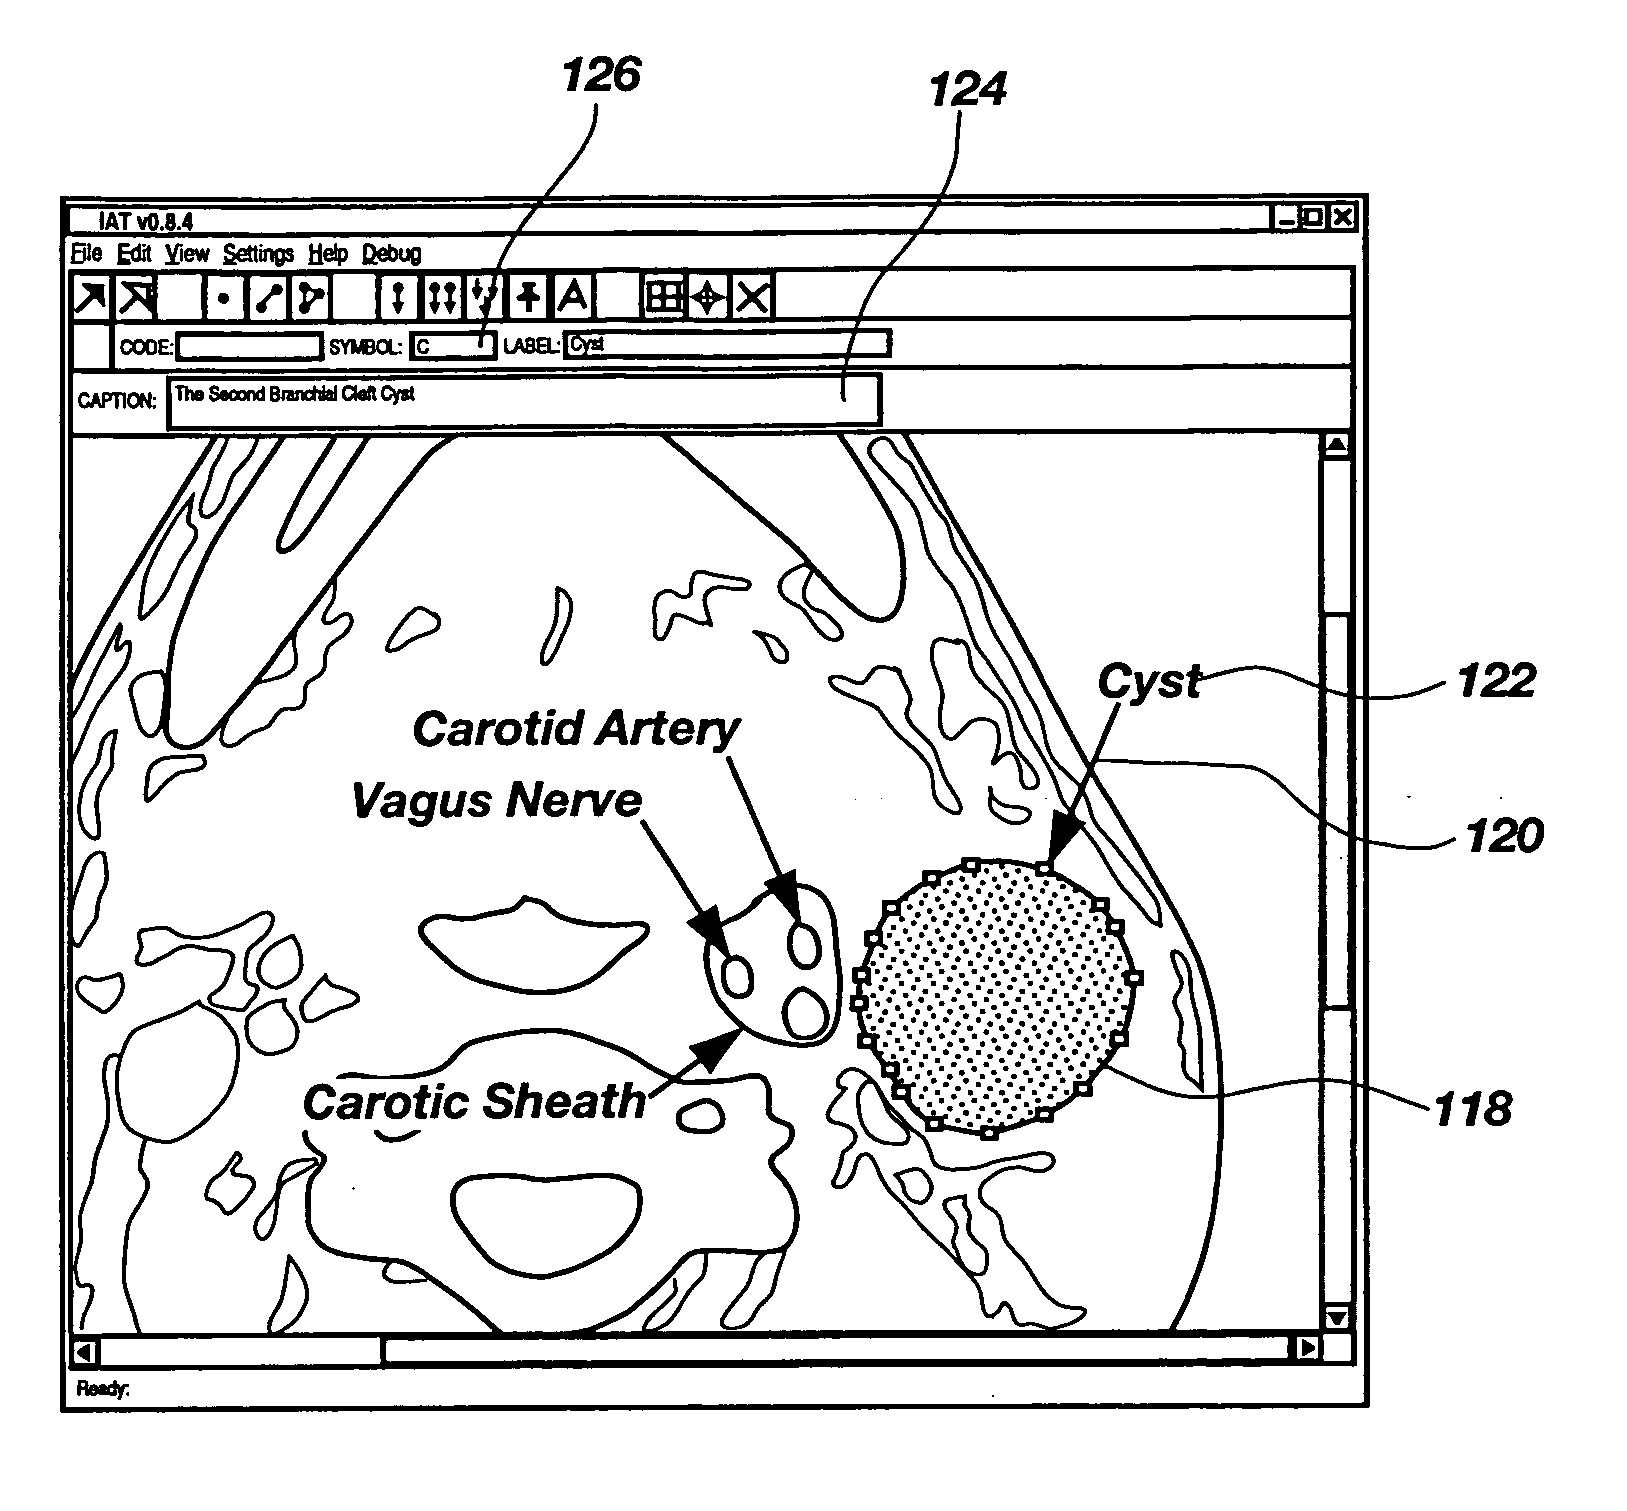 System and method for visual annotation and knowledge representation